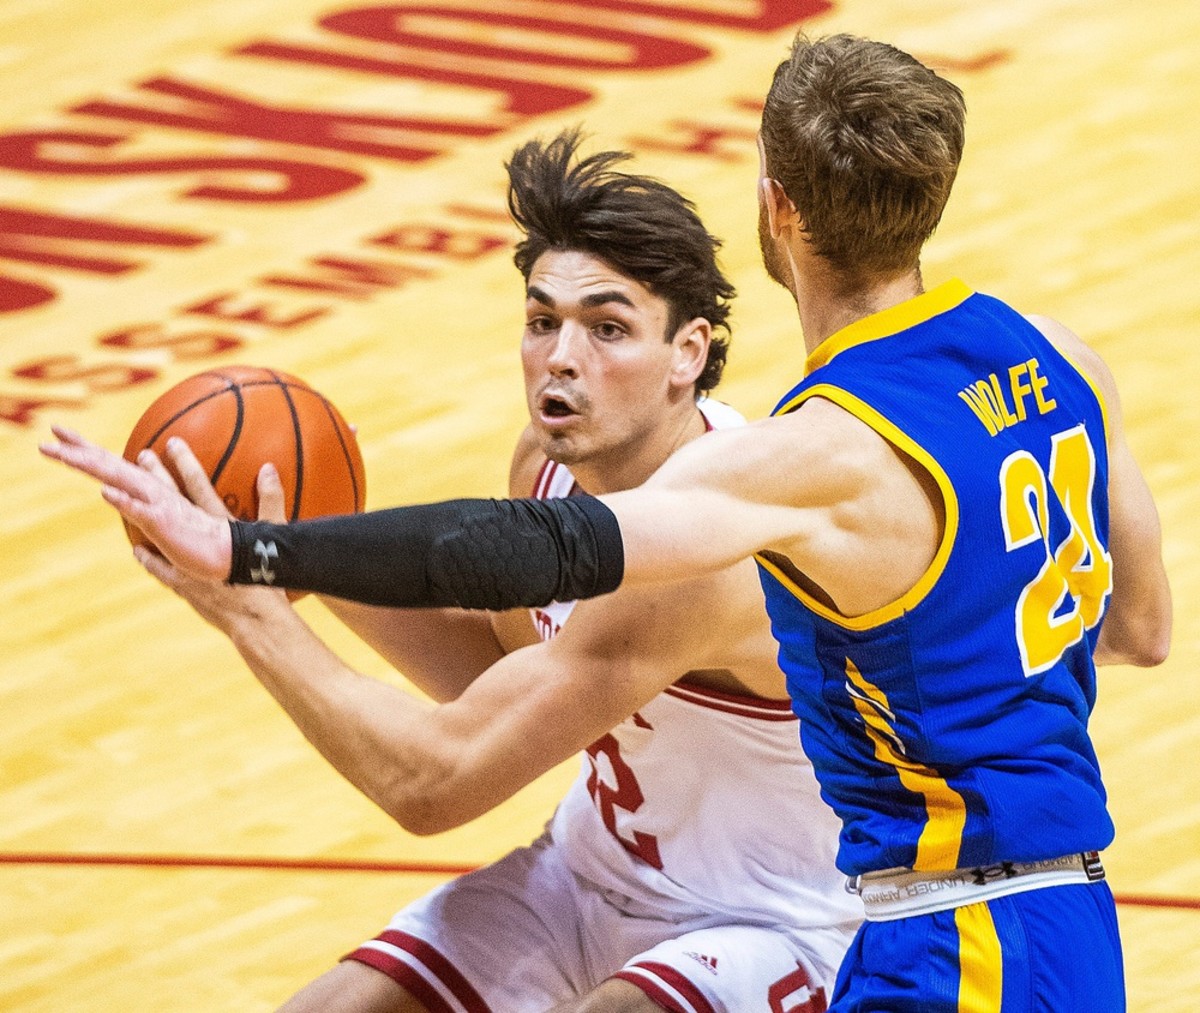 Indiana's Trey Galloway (32) drives the lane during the Indiana versus Morehead State men's baskertball game at Simon Skjodt Assembly Hall on Monday, Nov. 7, 2022.